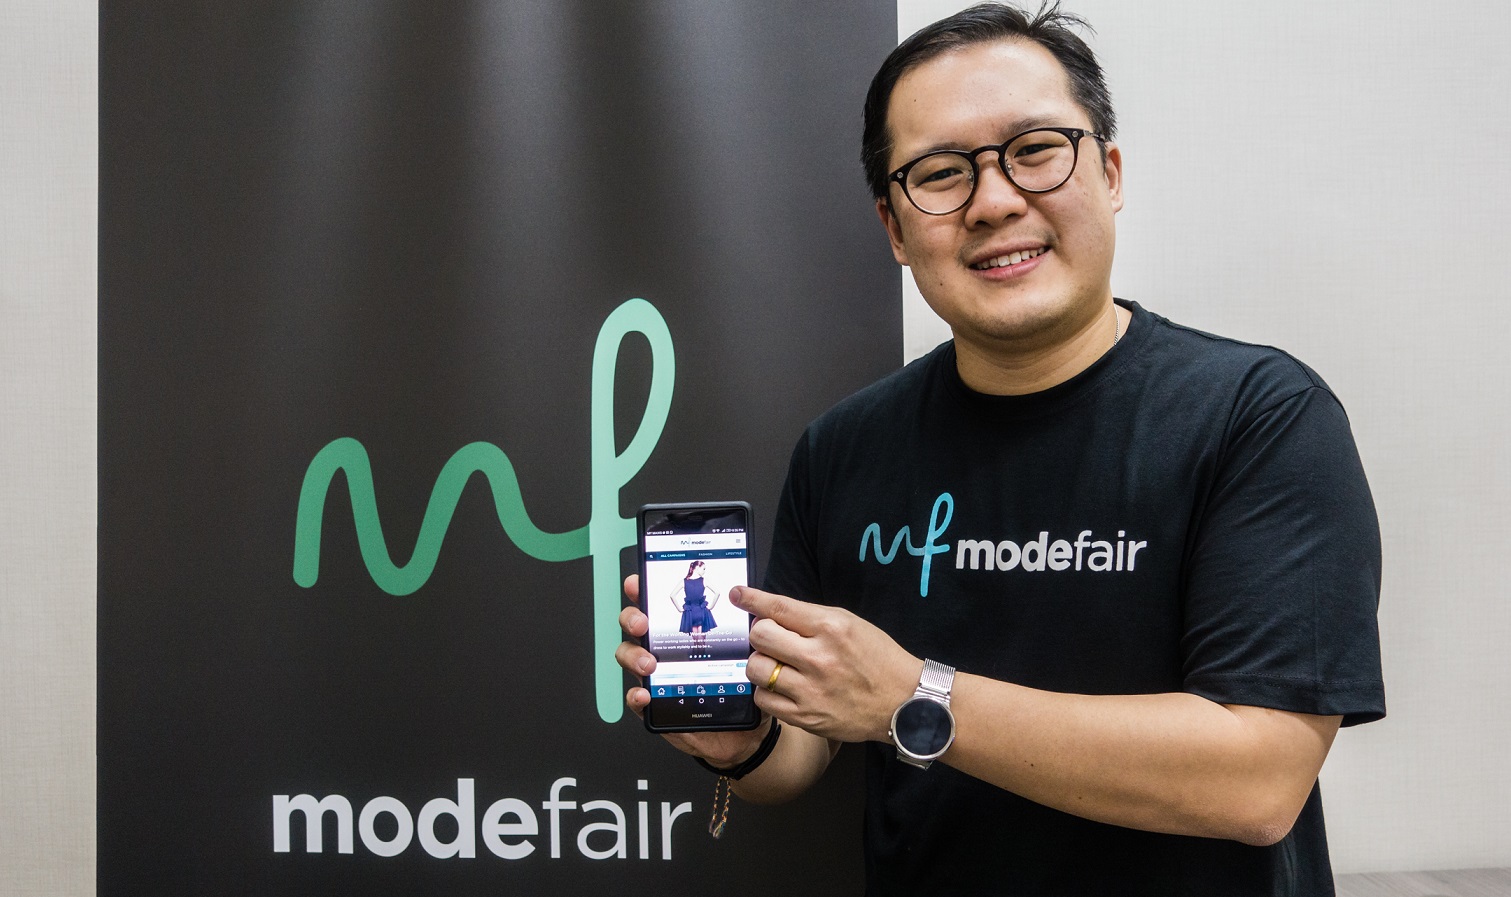 ModeFair takes e-commerce to a whole new social level